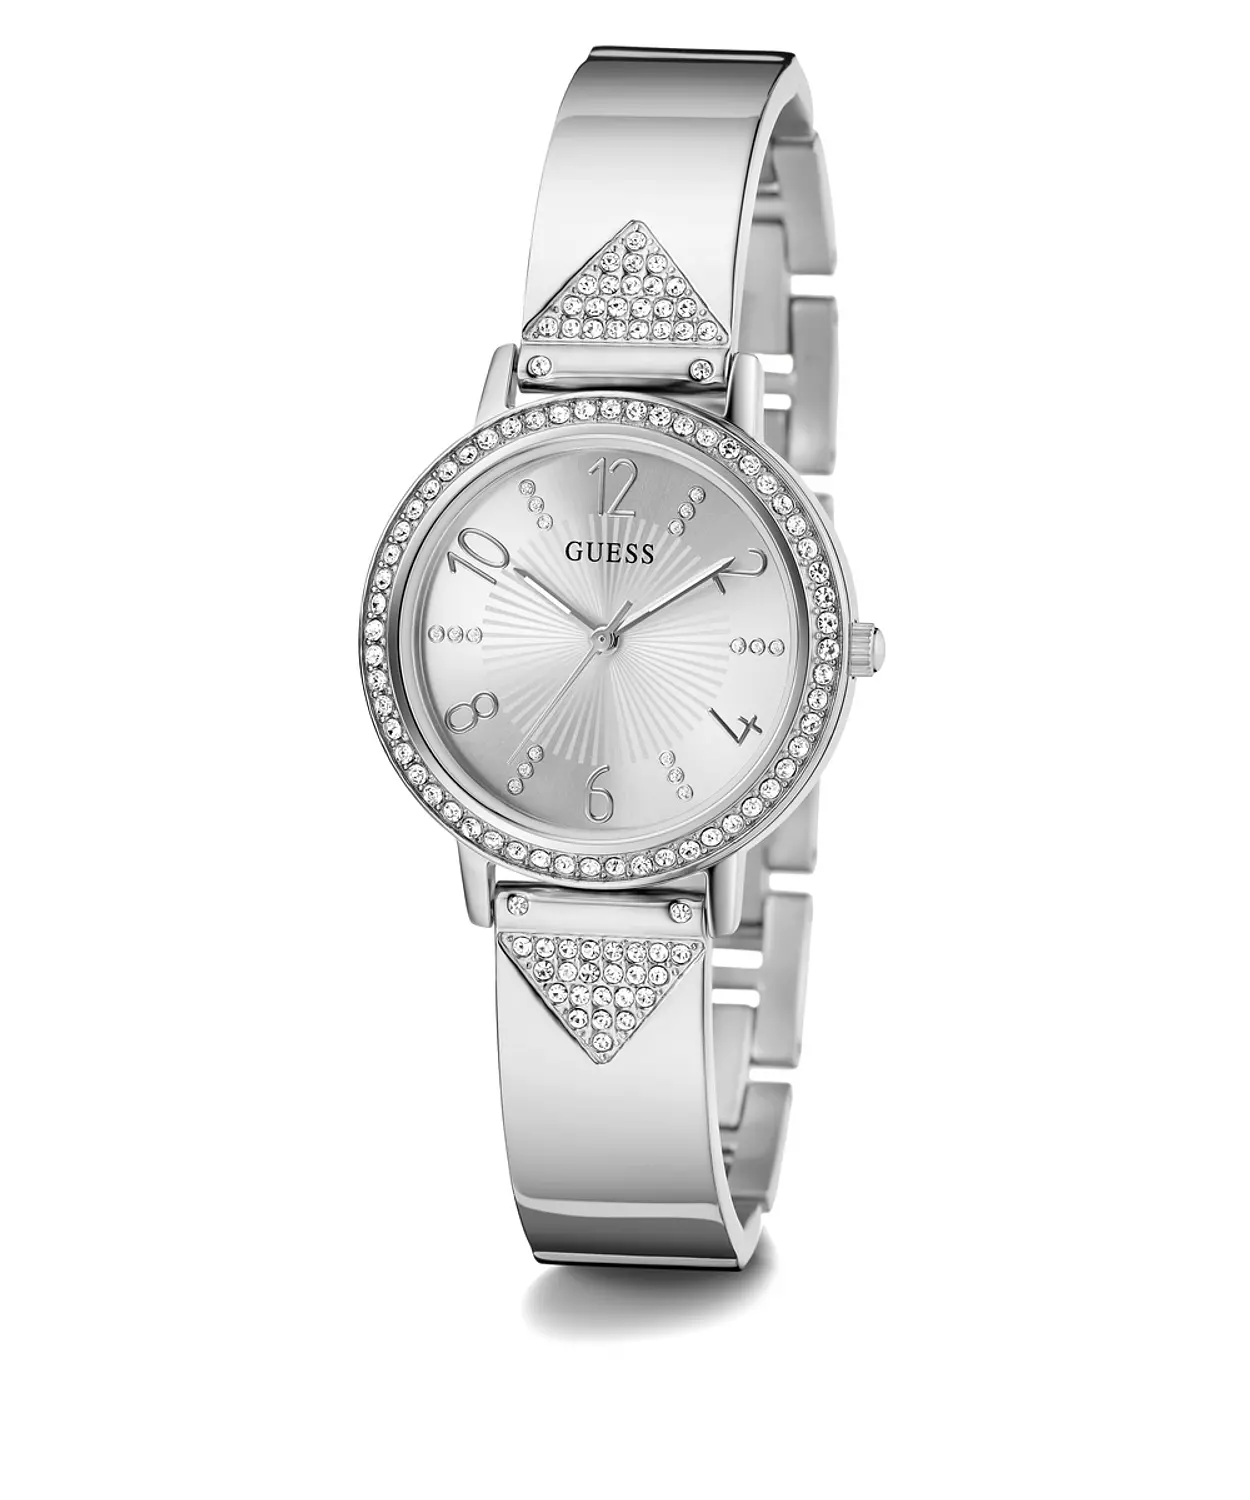 GUESS GW0474L1 ANALOG WATCH For Women Round Shape Silver Stainless Steel Polished Bracelet 2